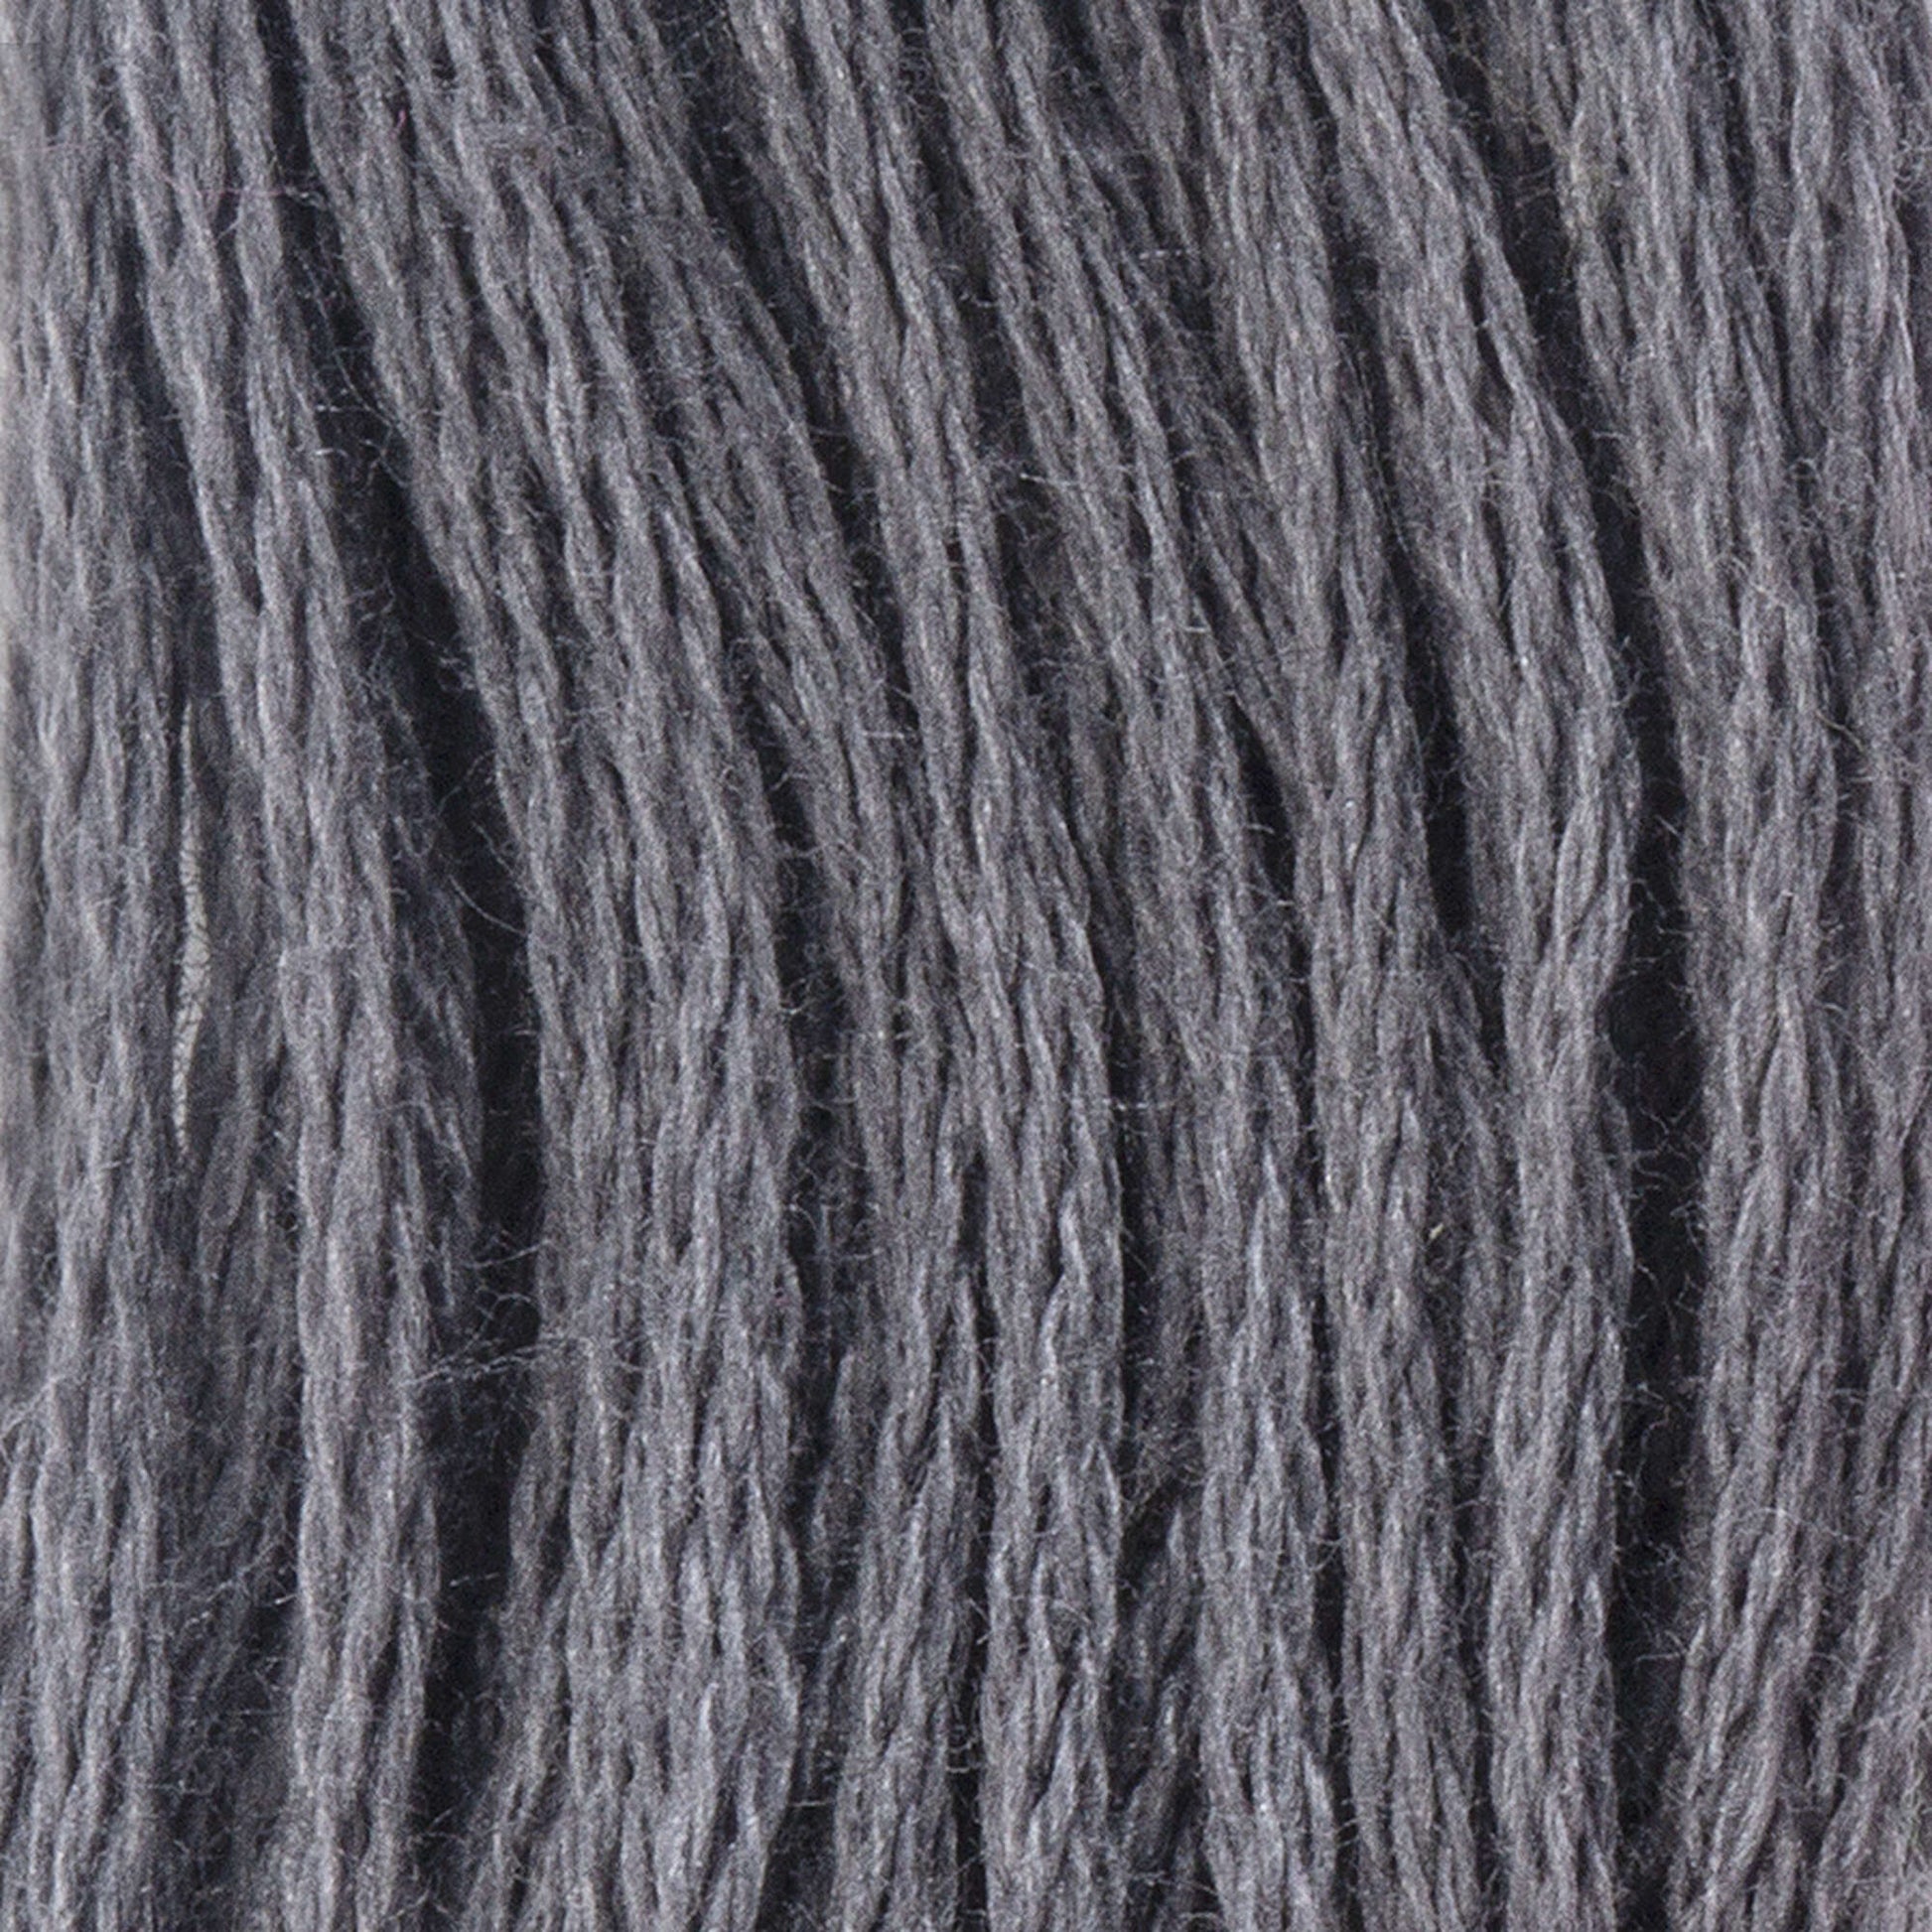 Coats & Clark Cotton Embroidery Floss Pewter Gray Dark